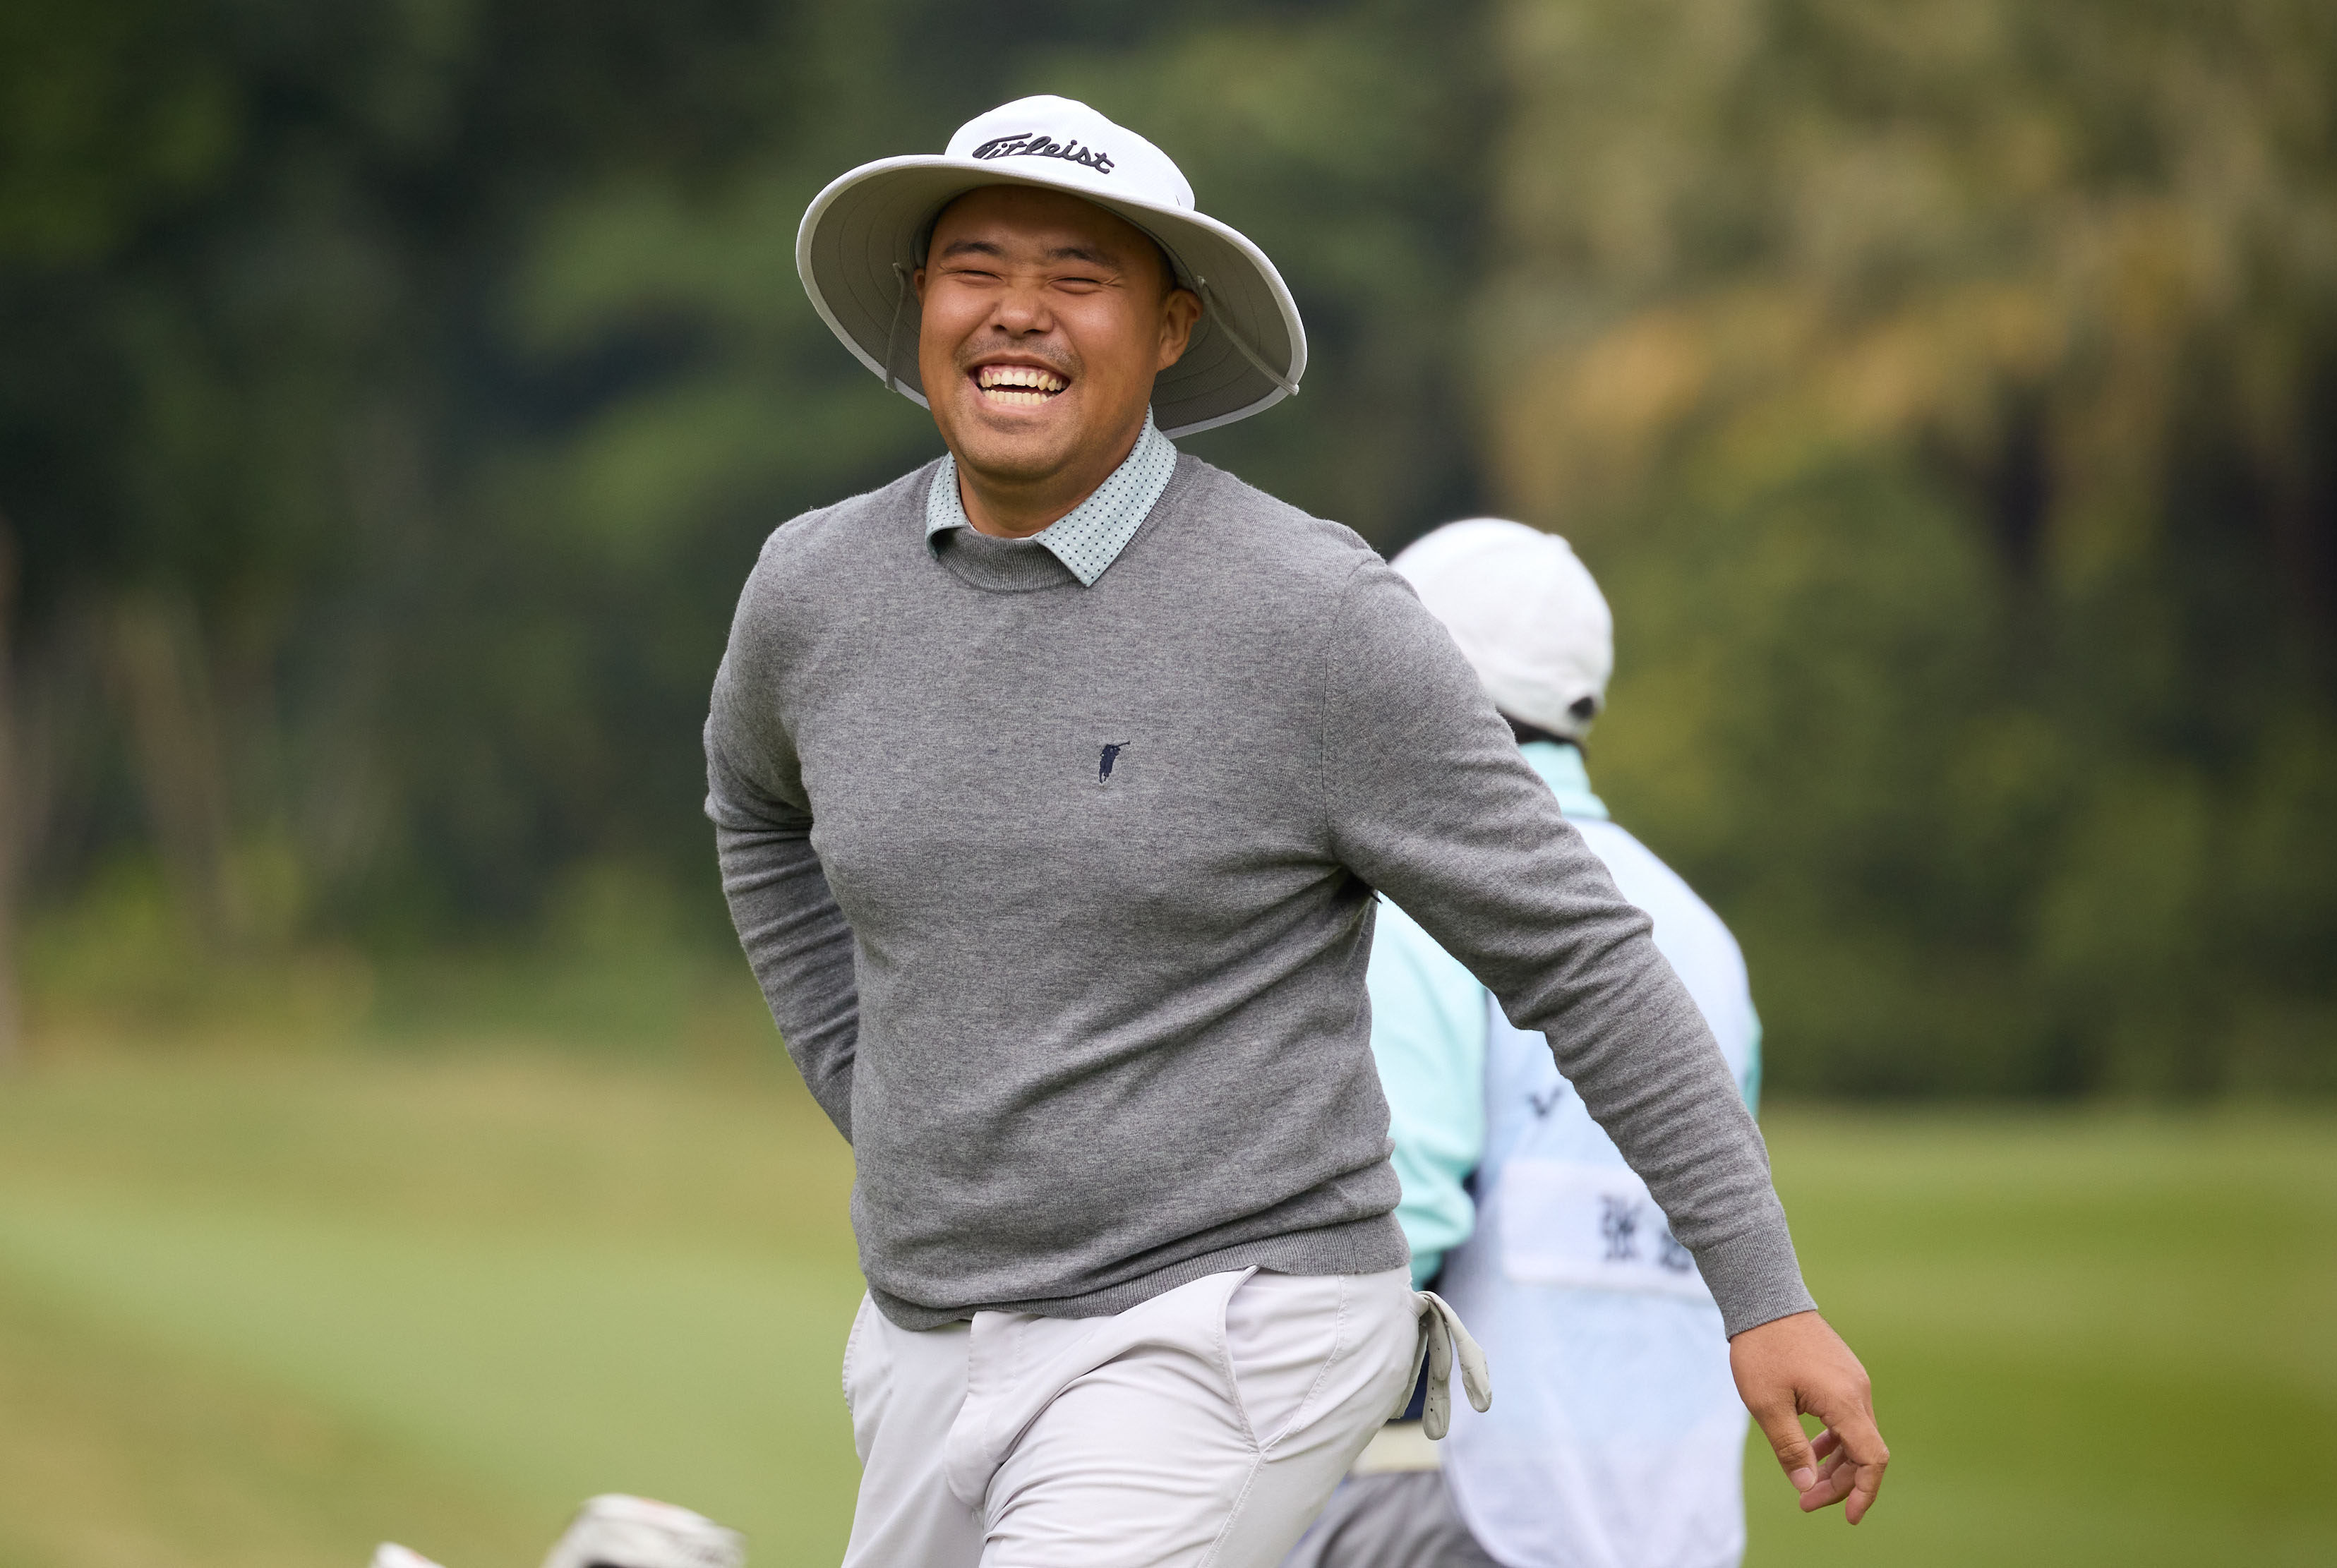 Zhang Jin is all smiles as he plays the final round of the Volvo China Open at Genzon Golf Club in Shenzhen. Photo: Handout